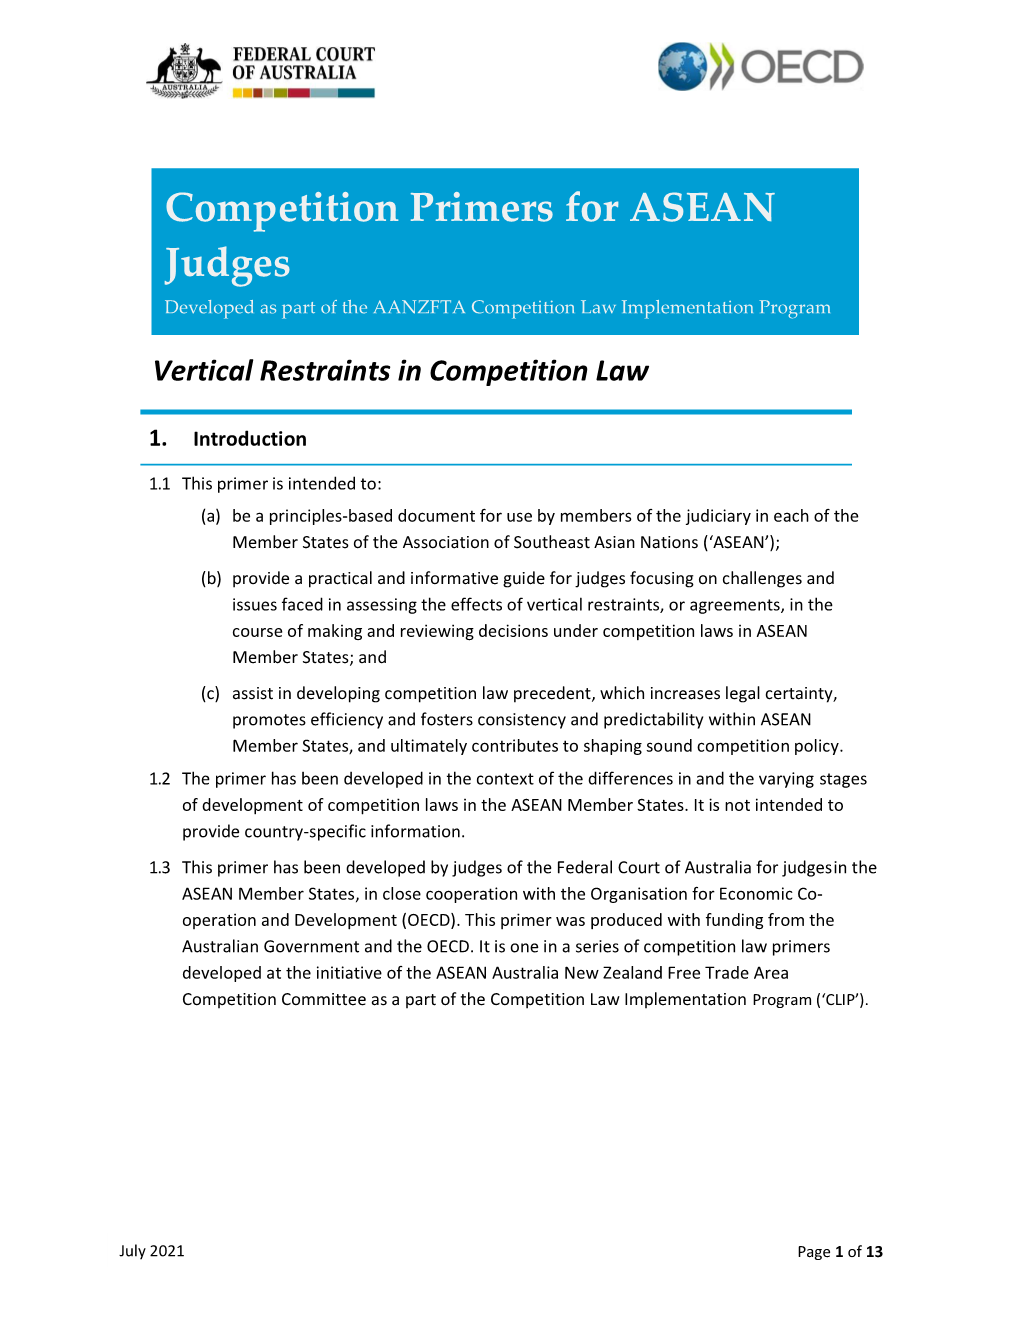 Competition Primers for ASEAN Judges Developed As Part of the AANZFTA Competition Law Implementation Program